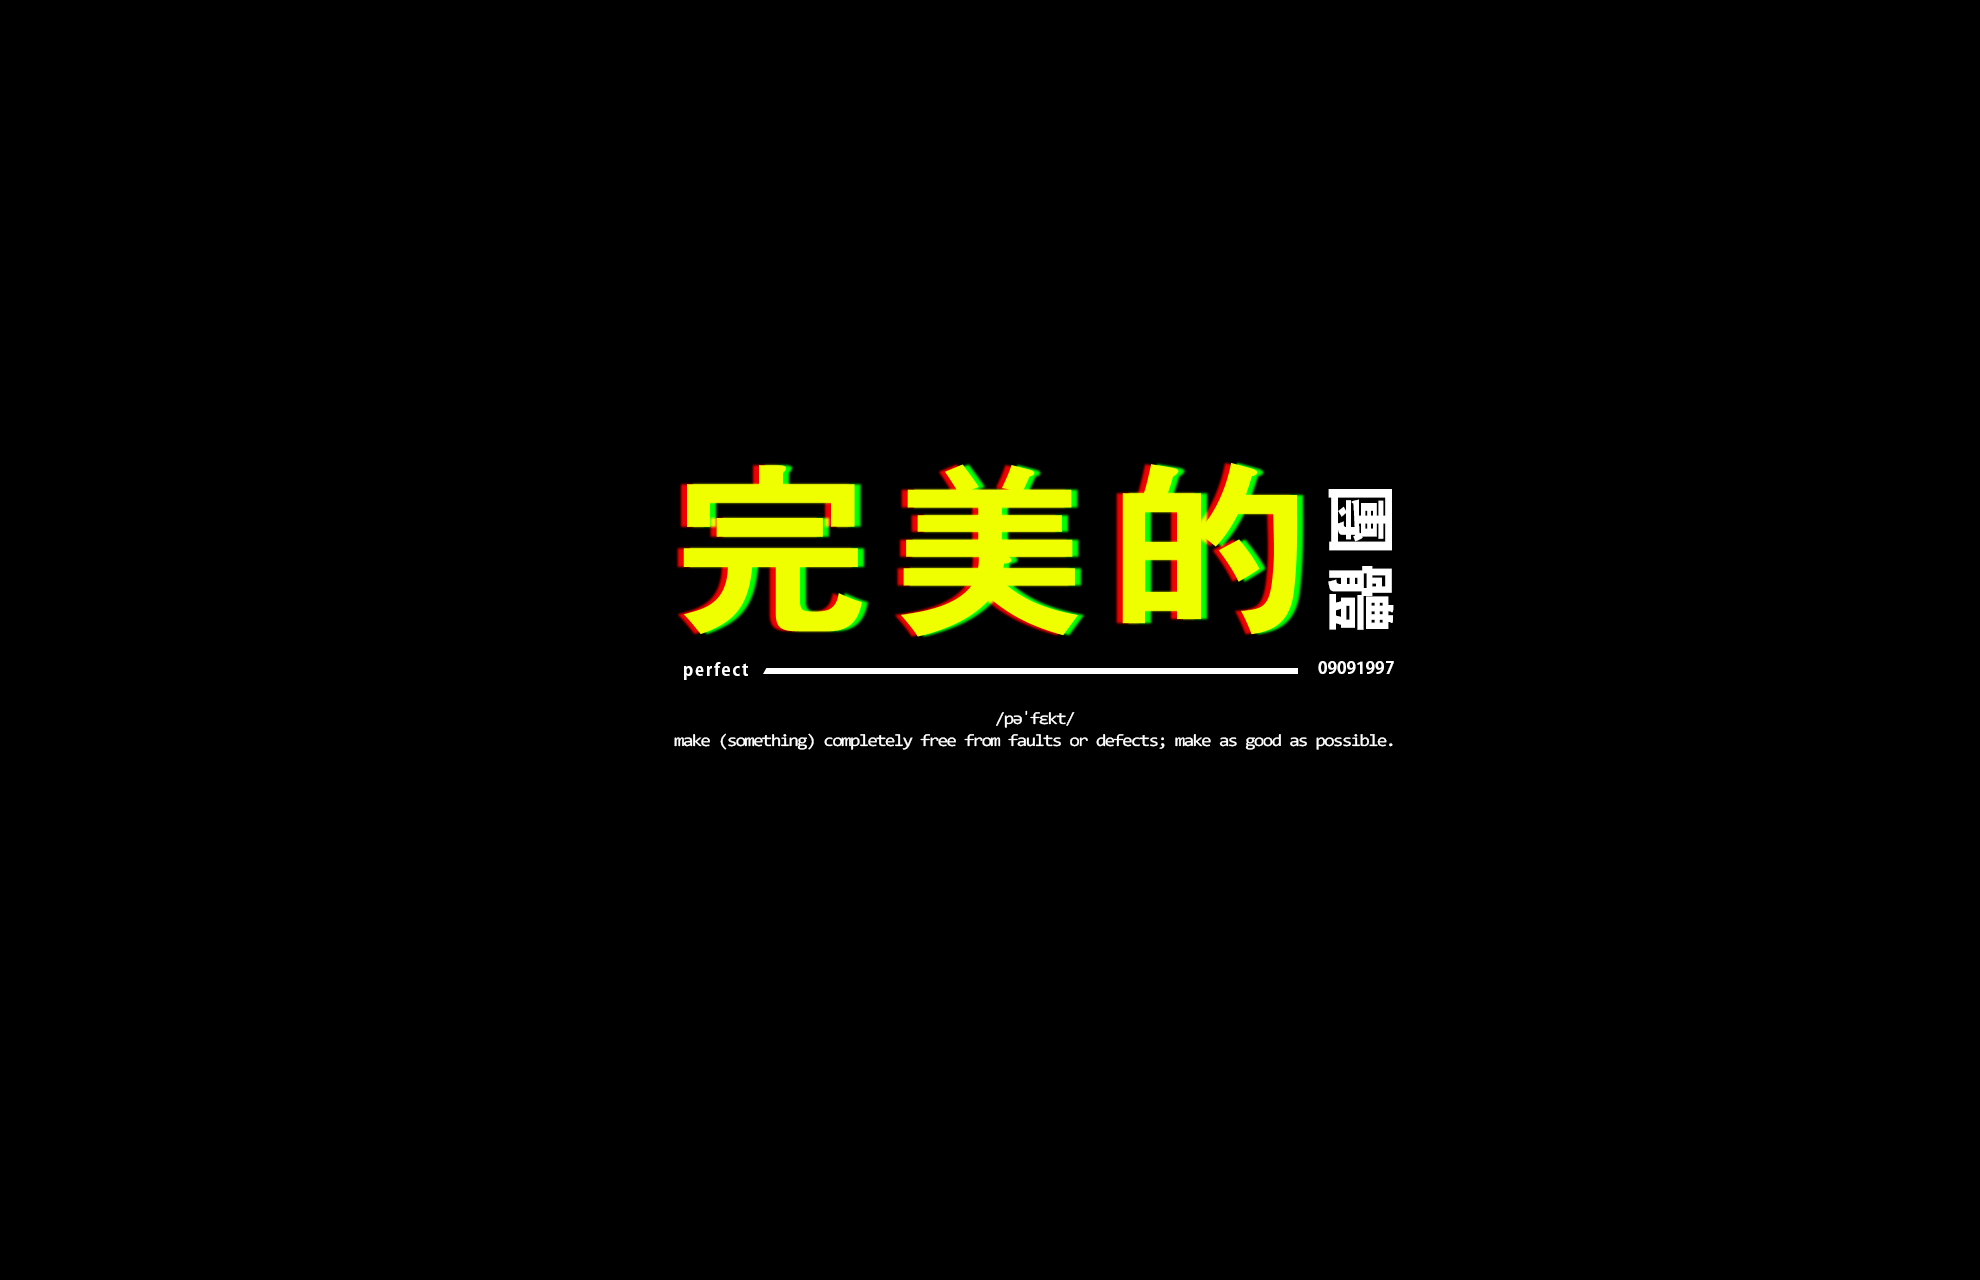 The Chinese characters in the picture are very cute, with a black background and yellow characters. - Black quotes, black glitch